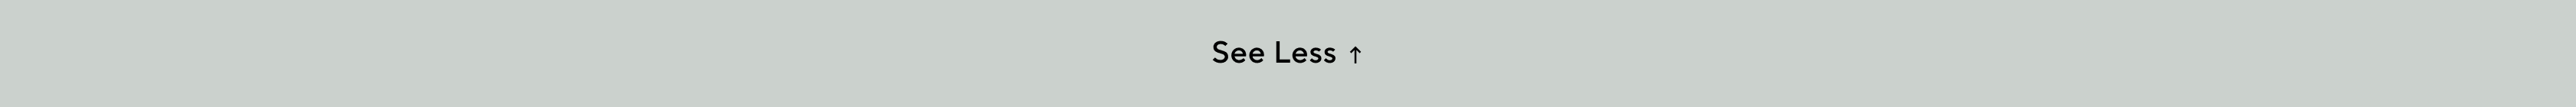 See Less